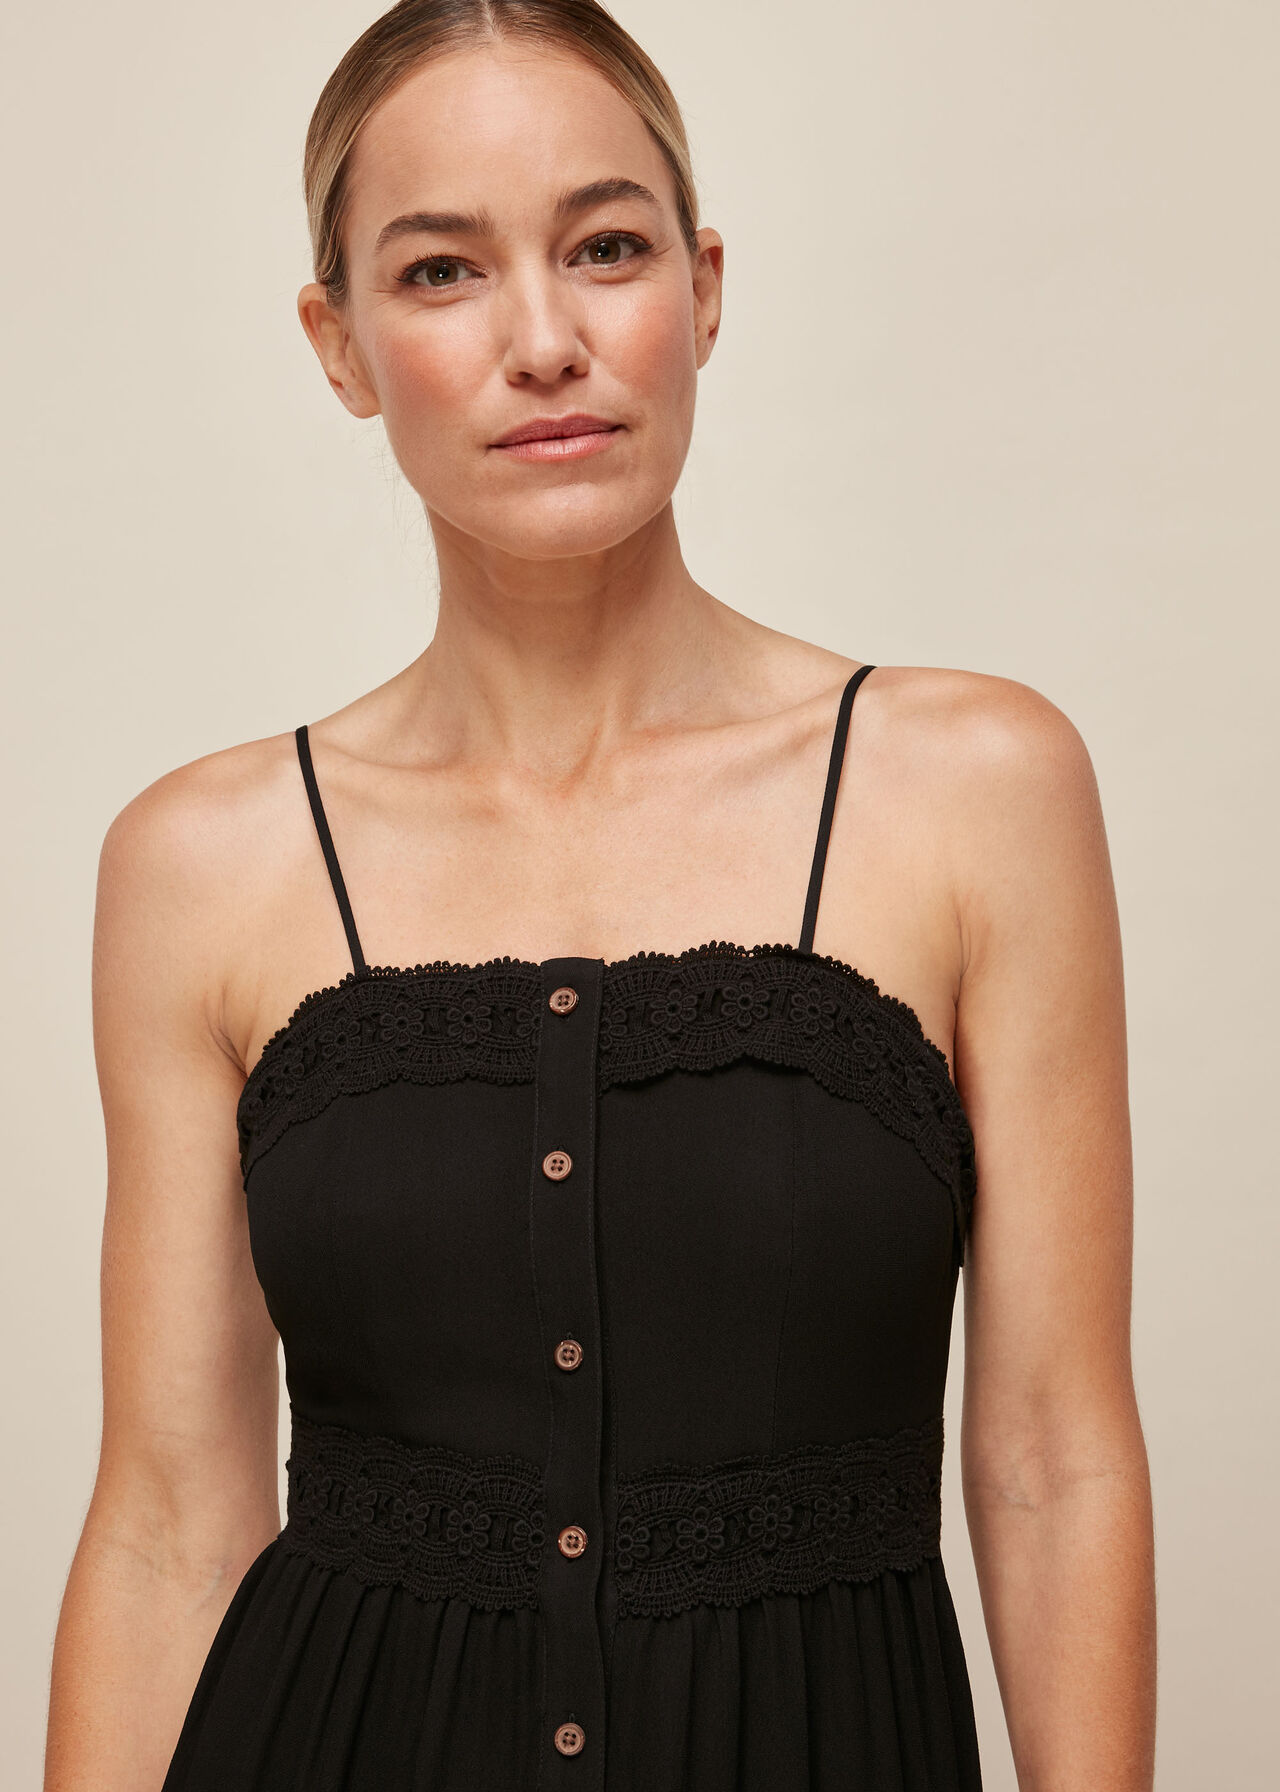 Black Strappy Lace Paneled Dress, WHISTLES